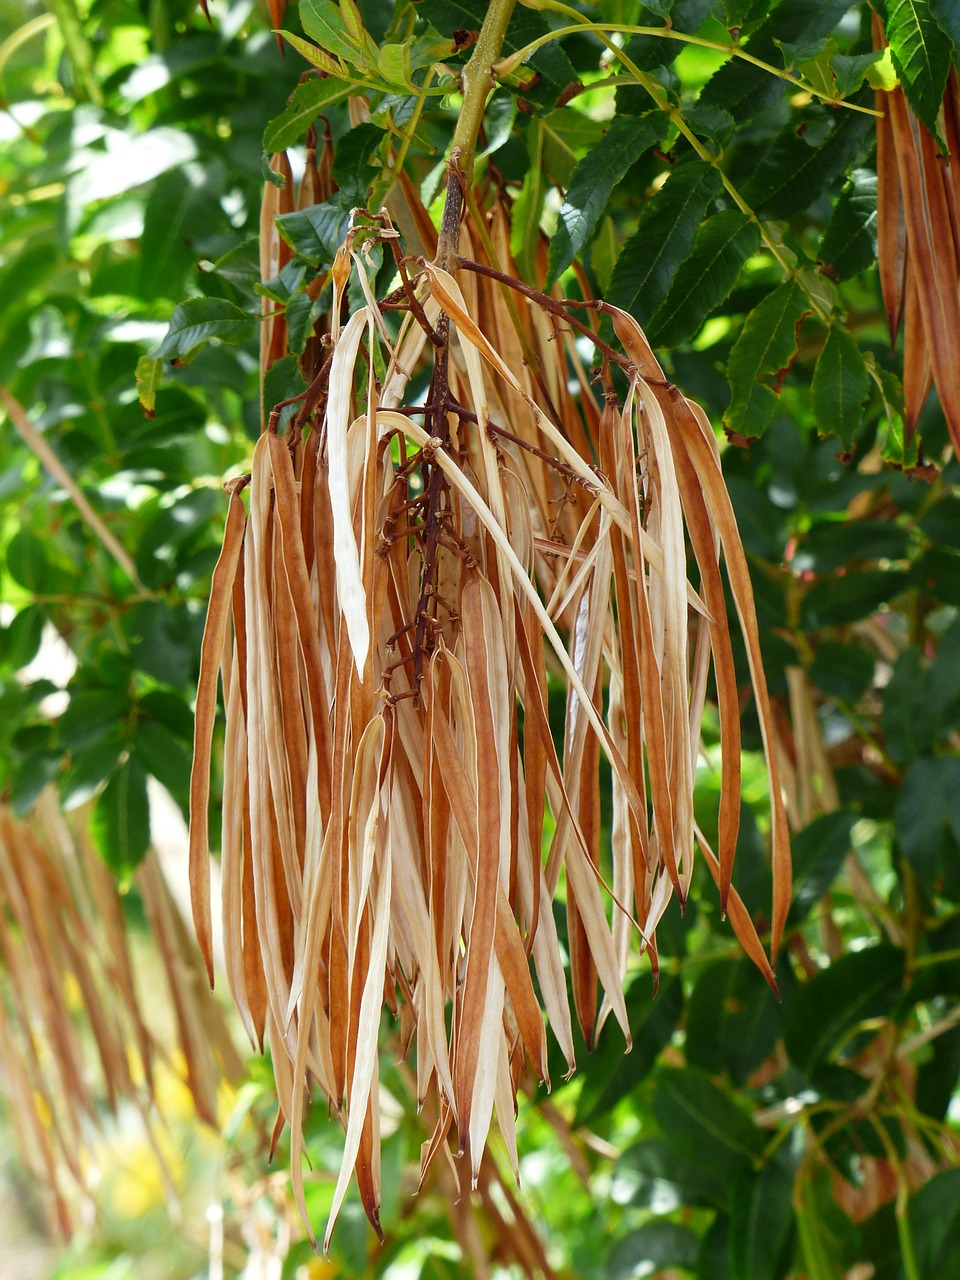 seeds oblong seed pods free photo